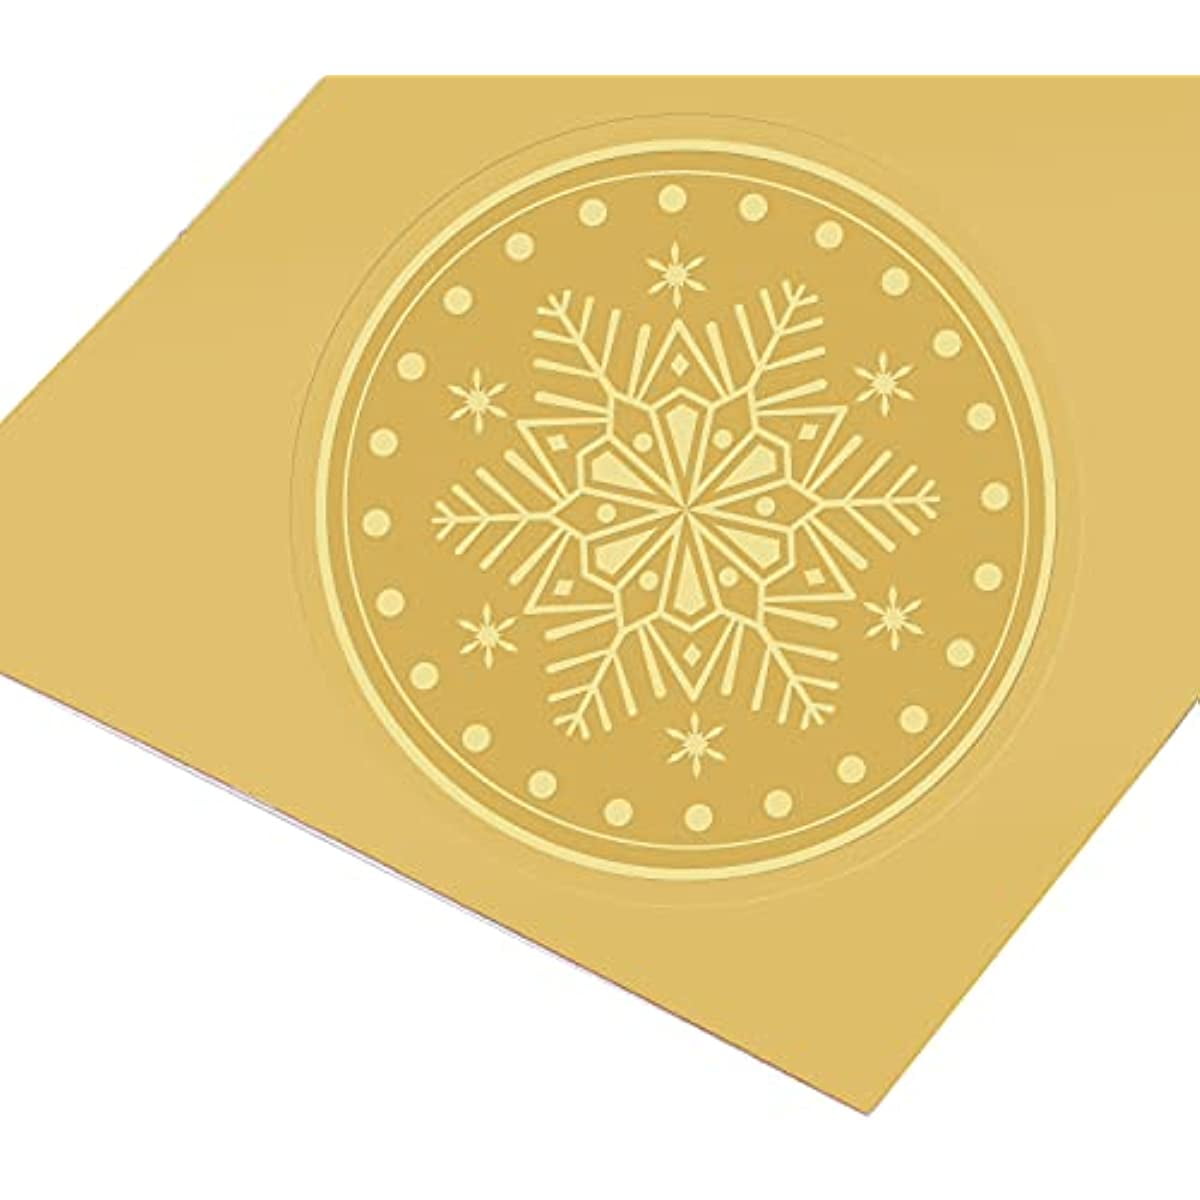  CRASPIRE 2 Gold Foil Sticker Honor Roll 100pcs Certificate  Seals Silver Embossed Round Olive Leaf Gold Certificate Seal Stickers for  Envelopes Invitation Card Diplomas Awards Graduation : Office Products